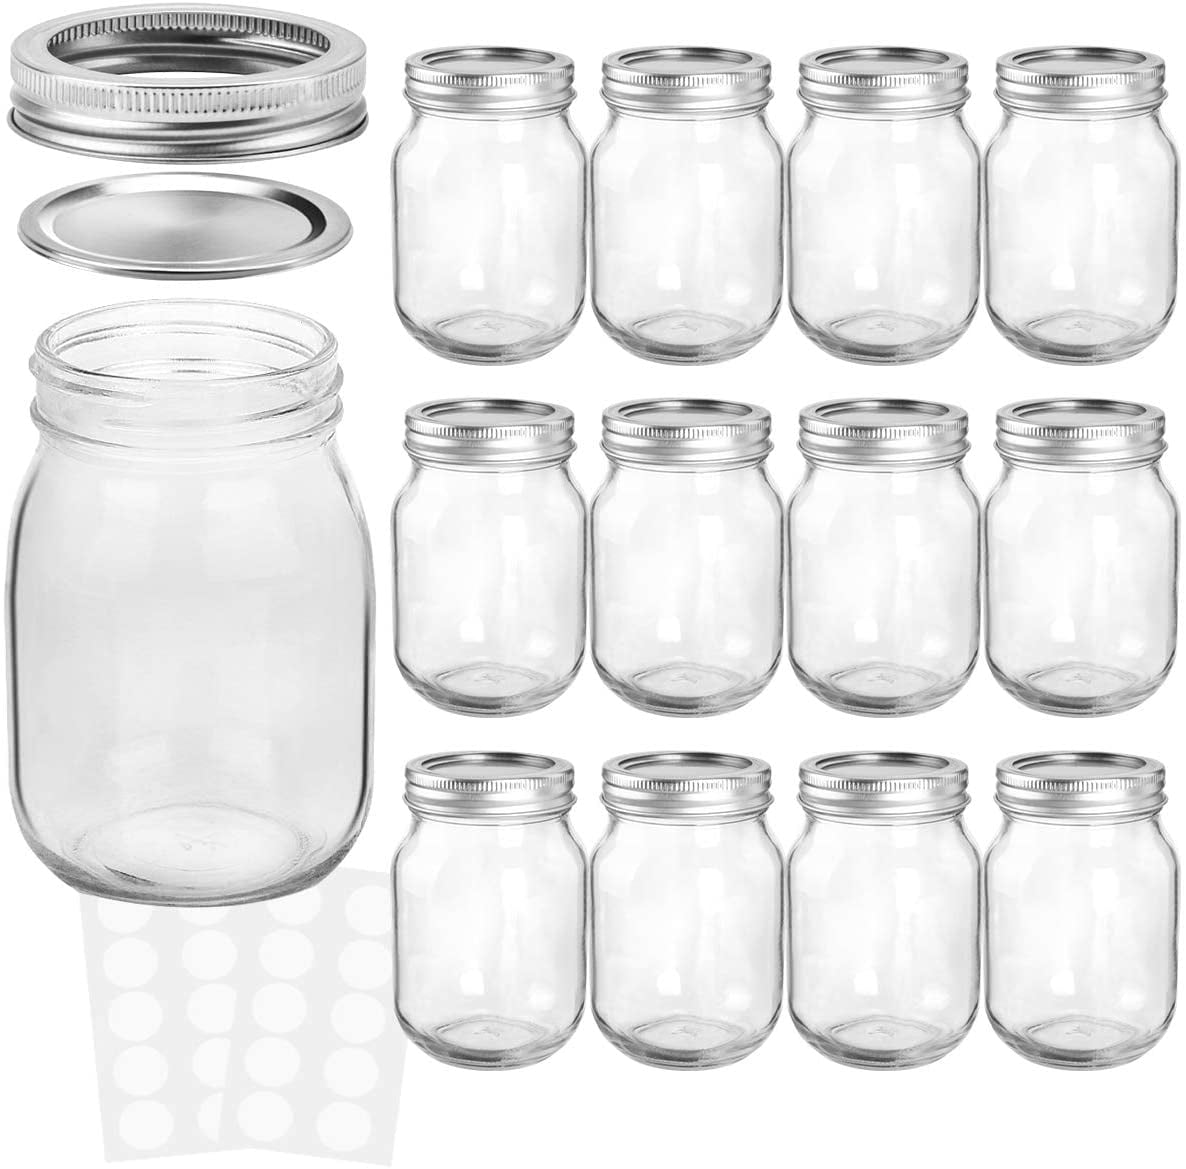 KAMOTA Glass Jars With Lids, 30 pack of 3.5 oz small glass jars for storage  spice herbal condiments with leak-proof rubber gaskets and airtight hinged